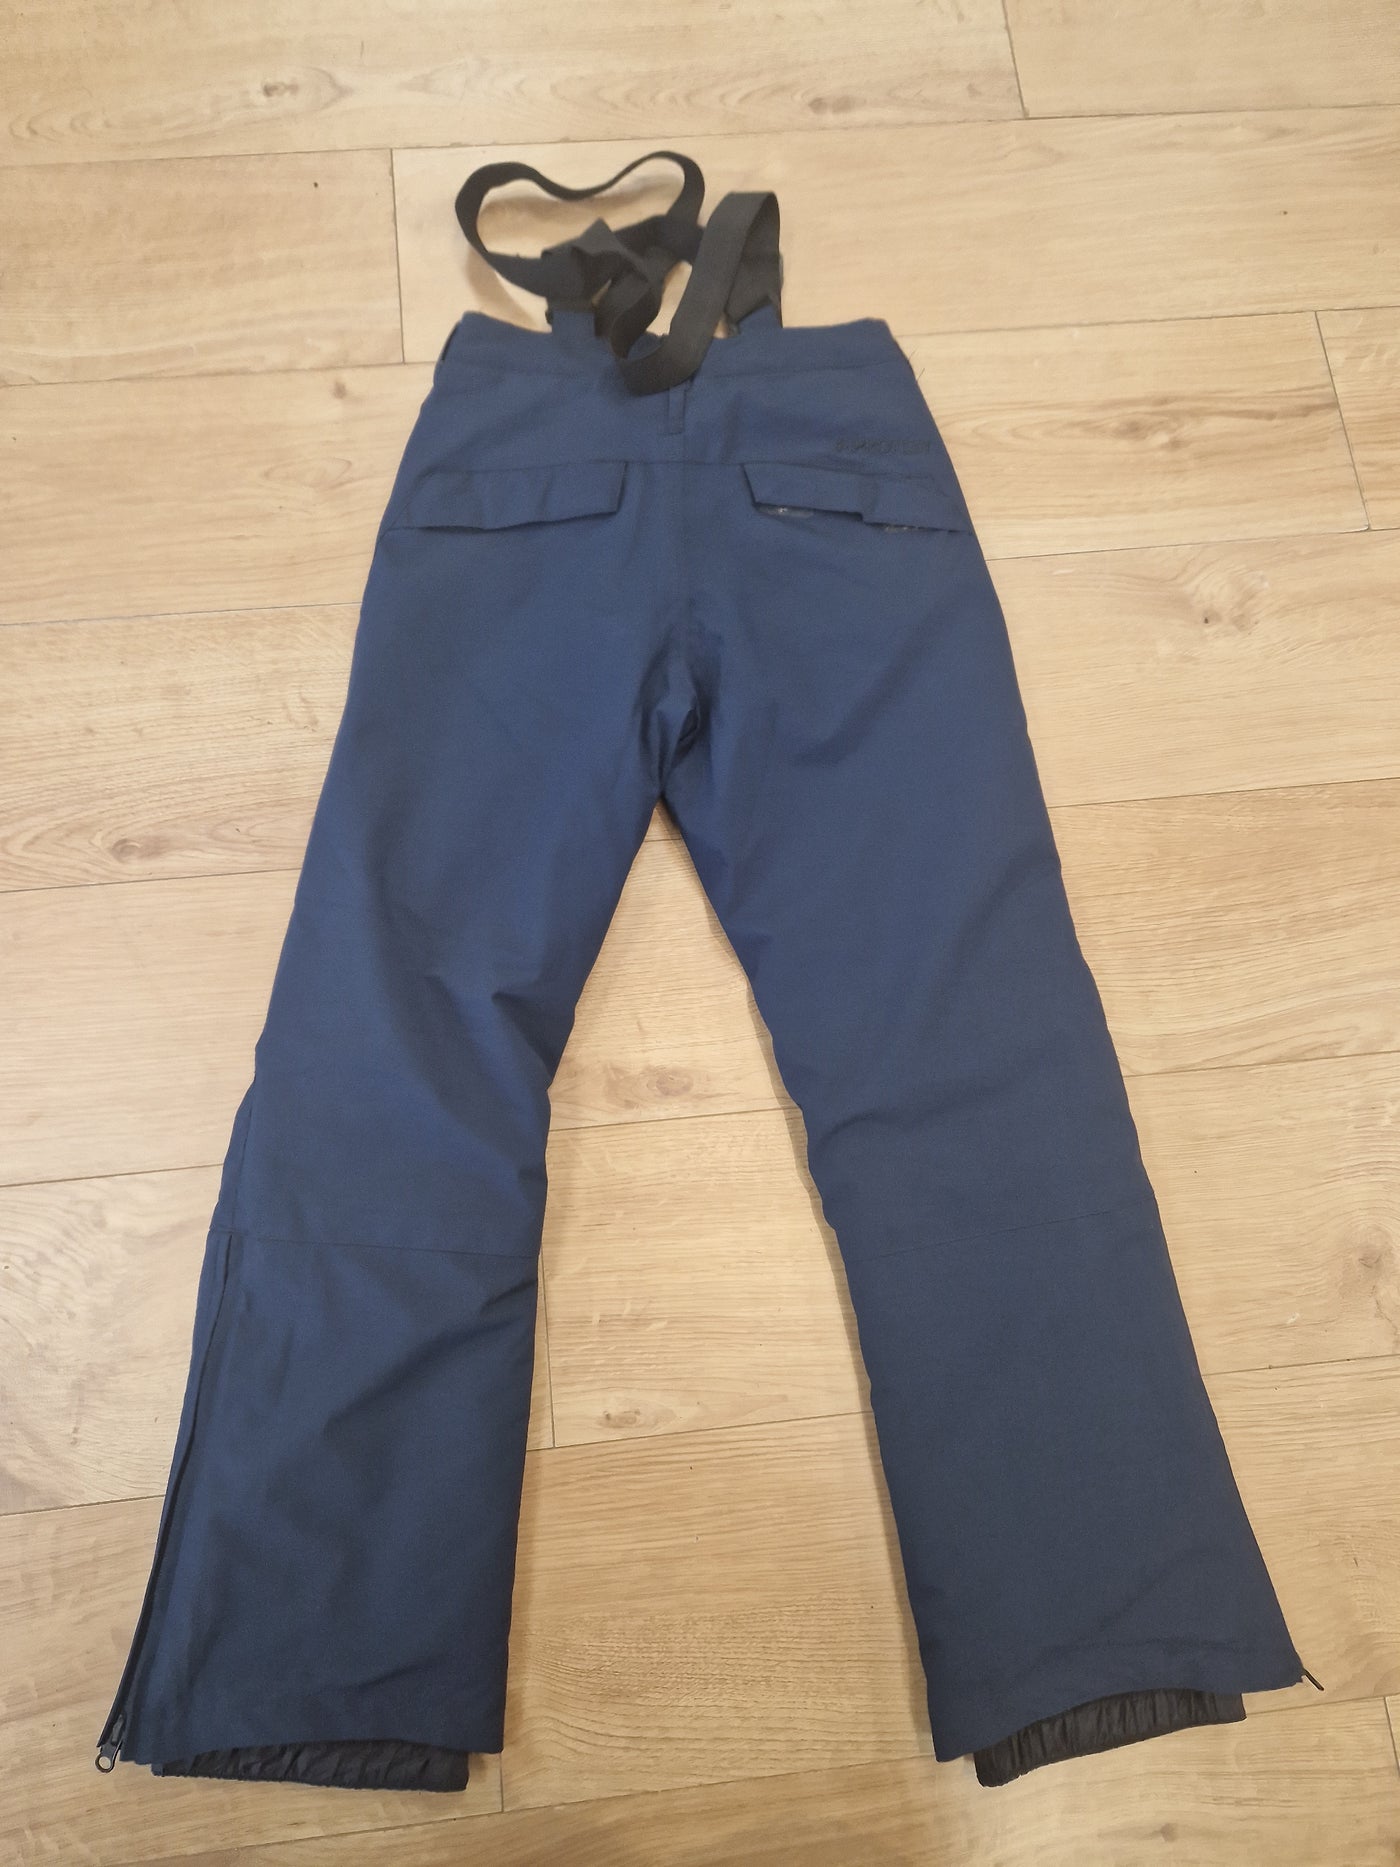 Pre-loved Protest Spiket Boys Snow Trousers 152 cm (271) - Grade C